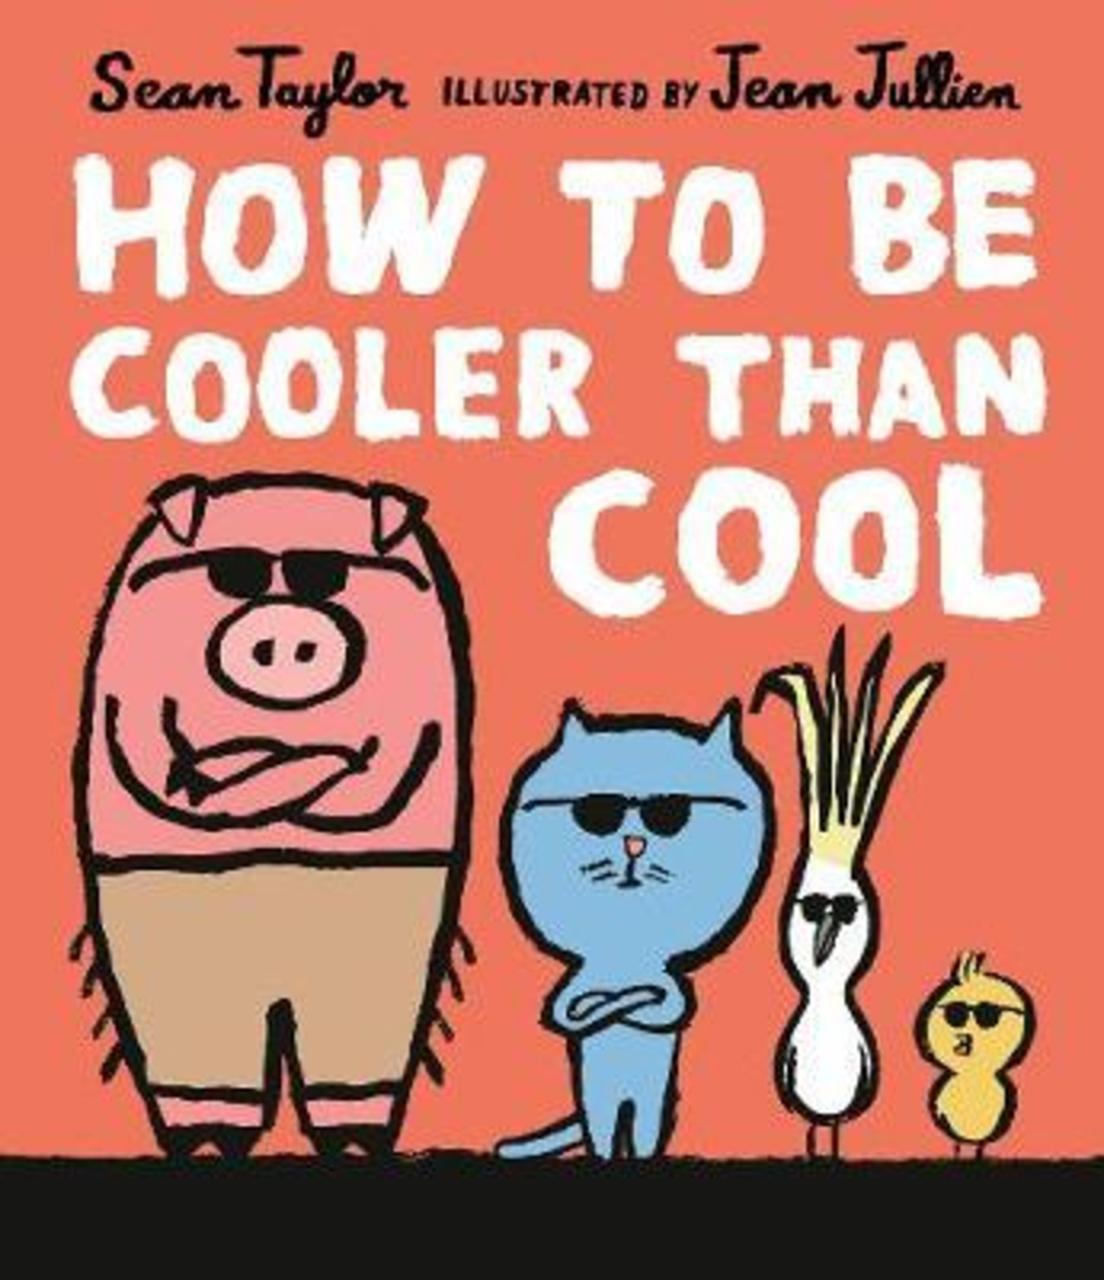 Sách - How to Be Cooler than Cool by Sean Taylor Jean Jullien (UK edition, hardcover)